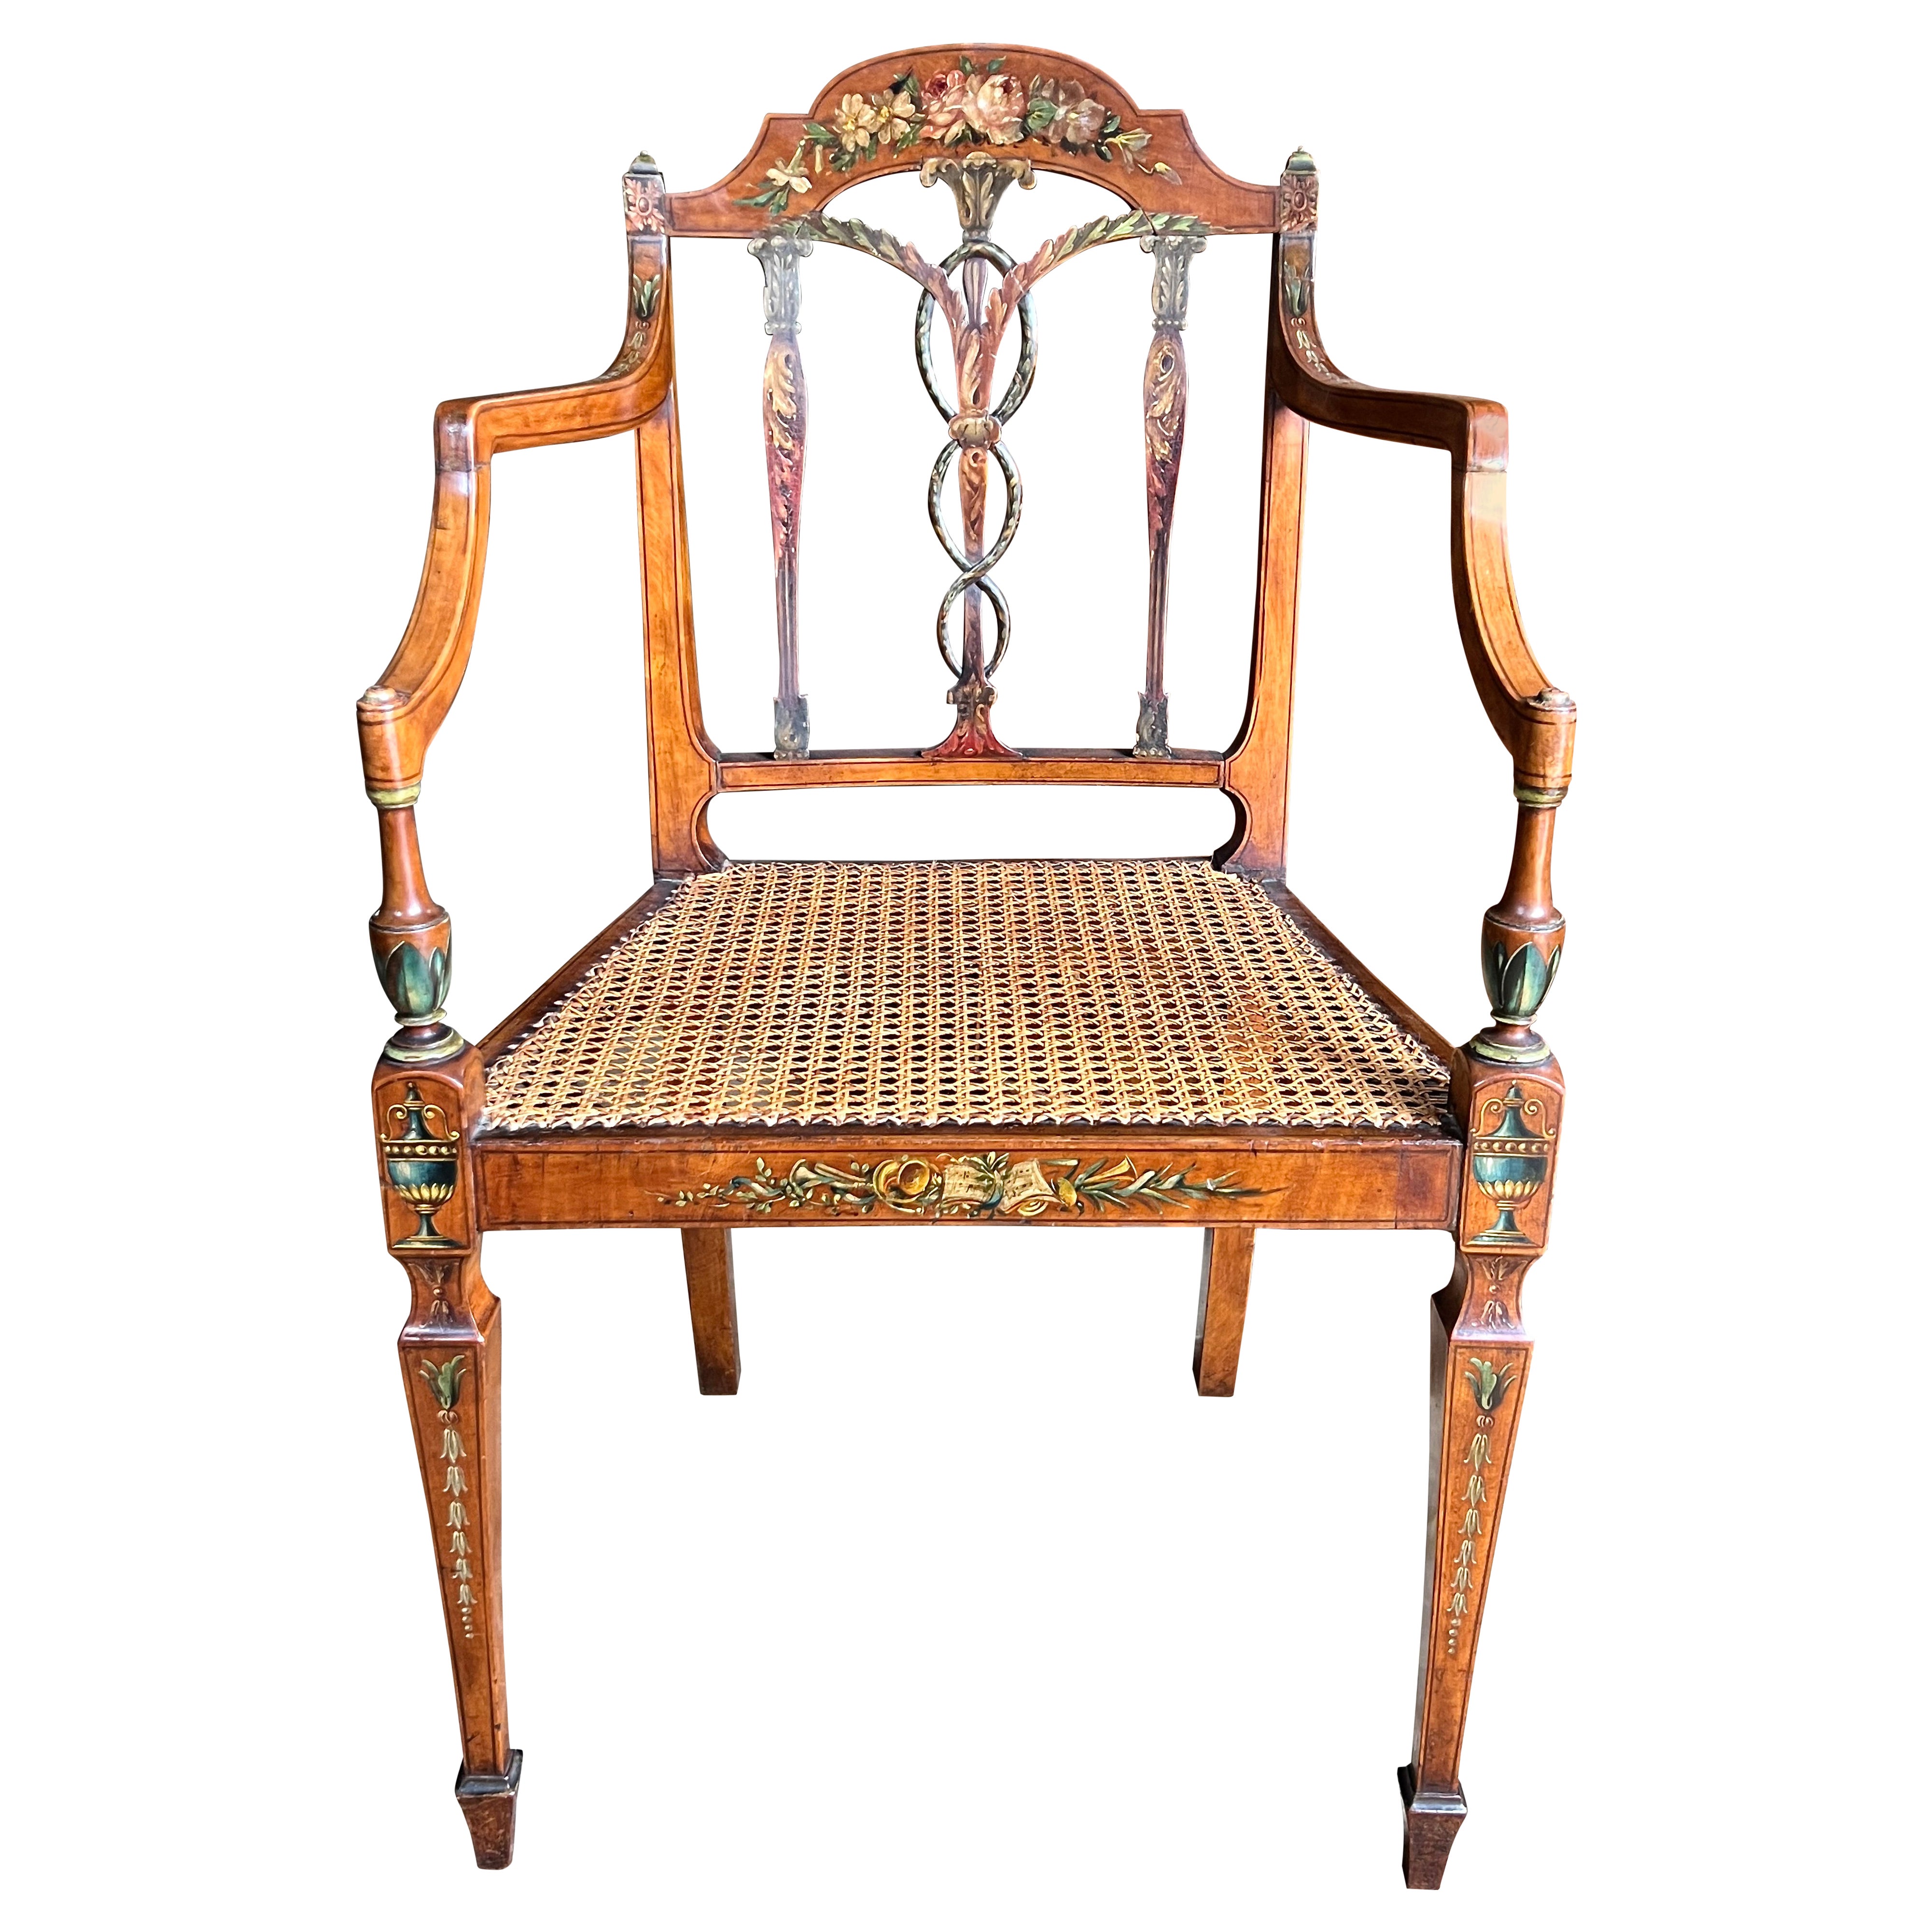 Set of Four 18th Century Satinwood Painted Armchairs - Seddon, Sons & Shackleton For Sale